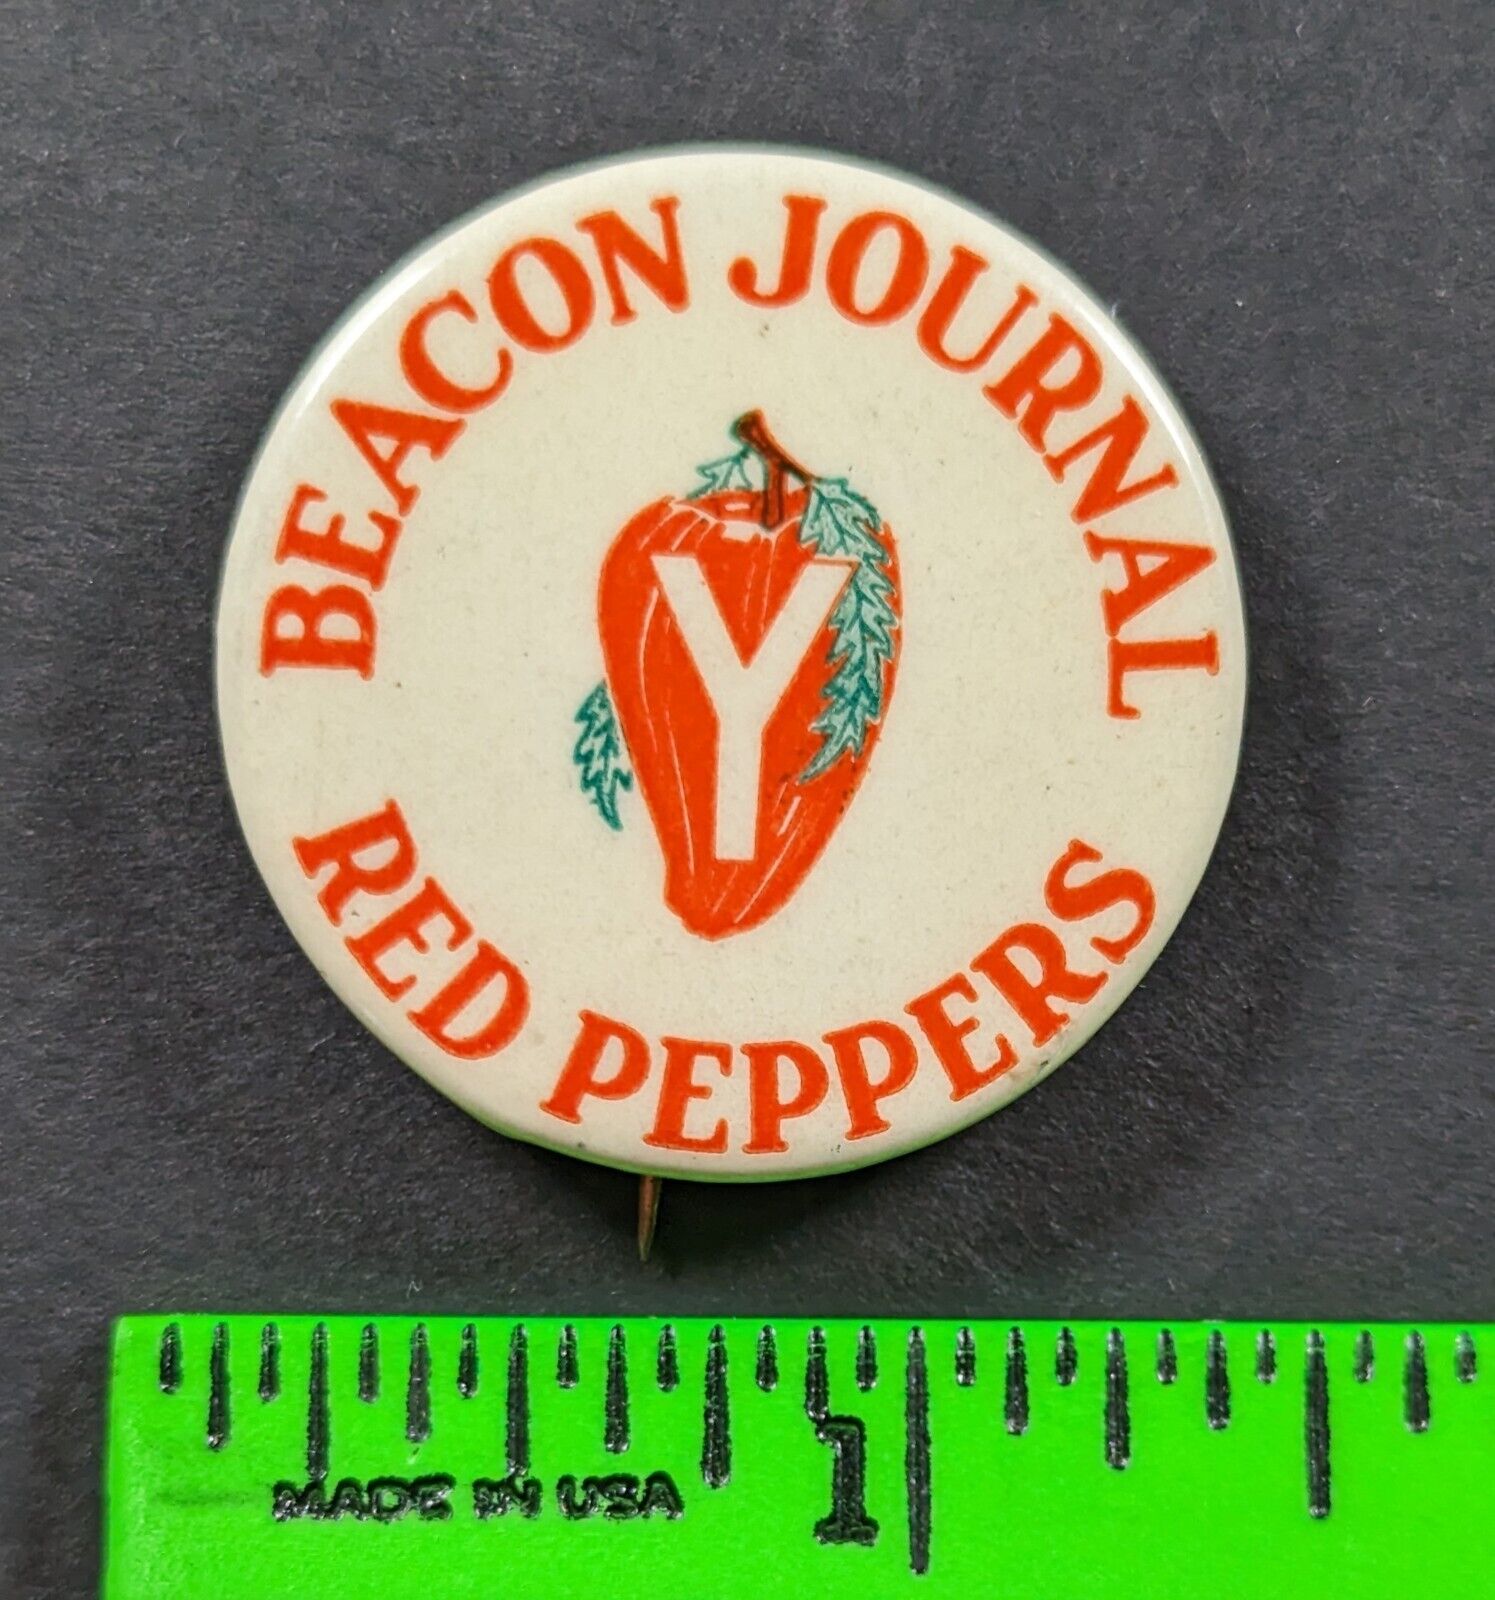 Vintage 1930's Beacon Journal Red Peppers Akron Ohio Pinback Pin